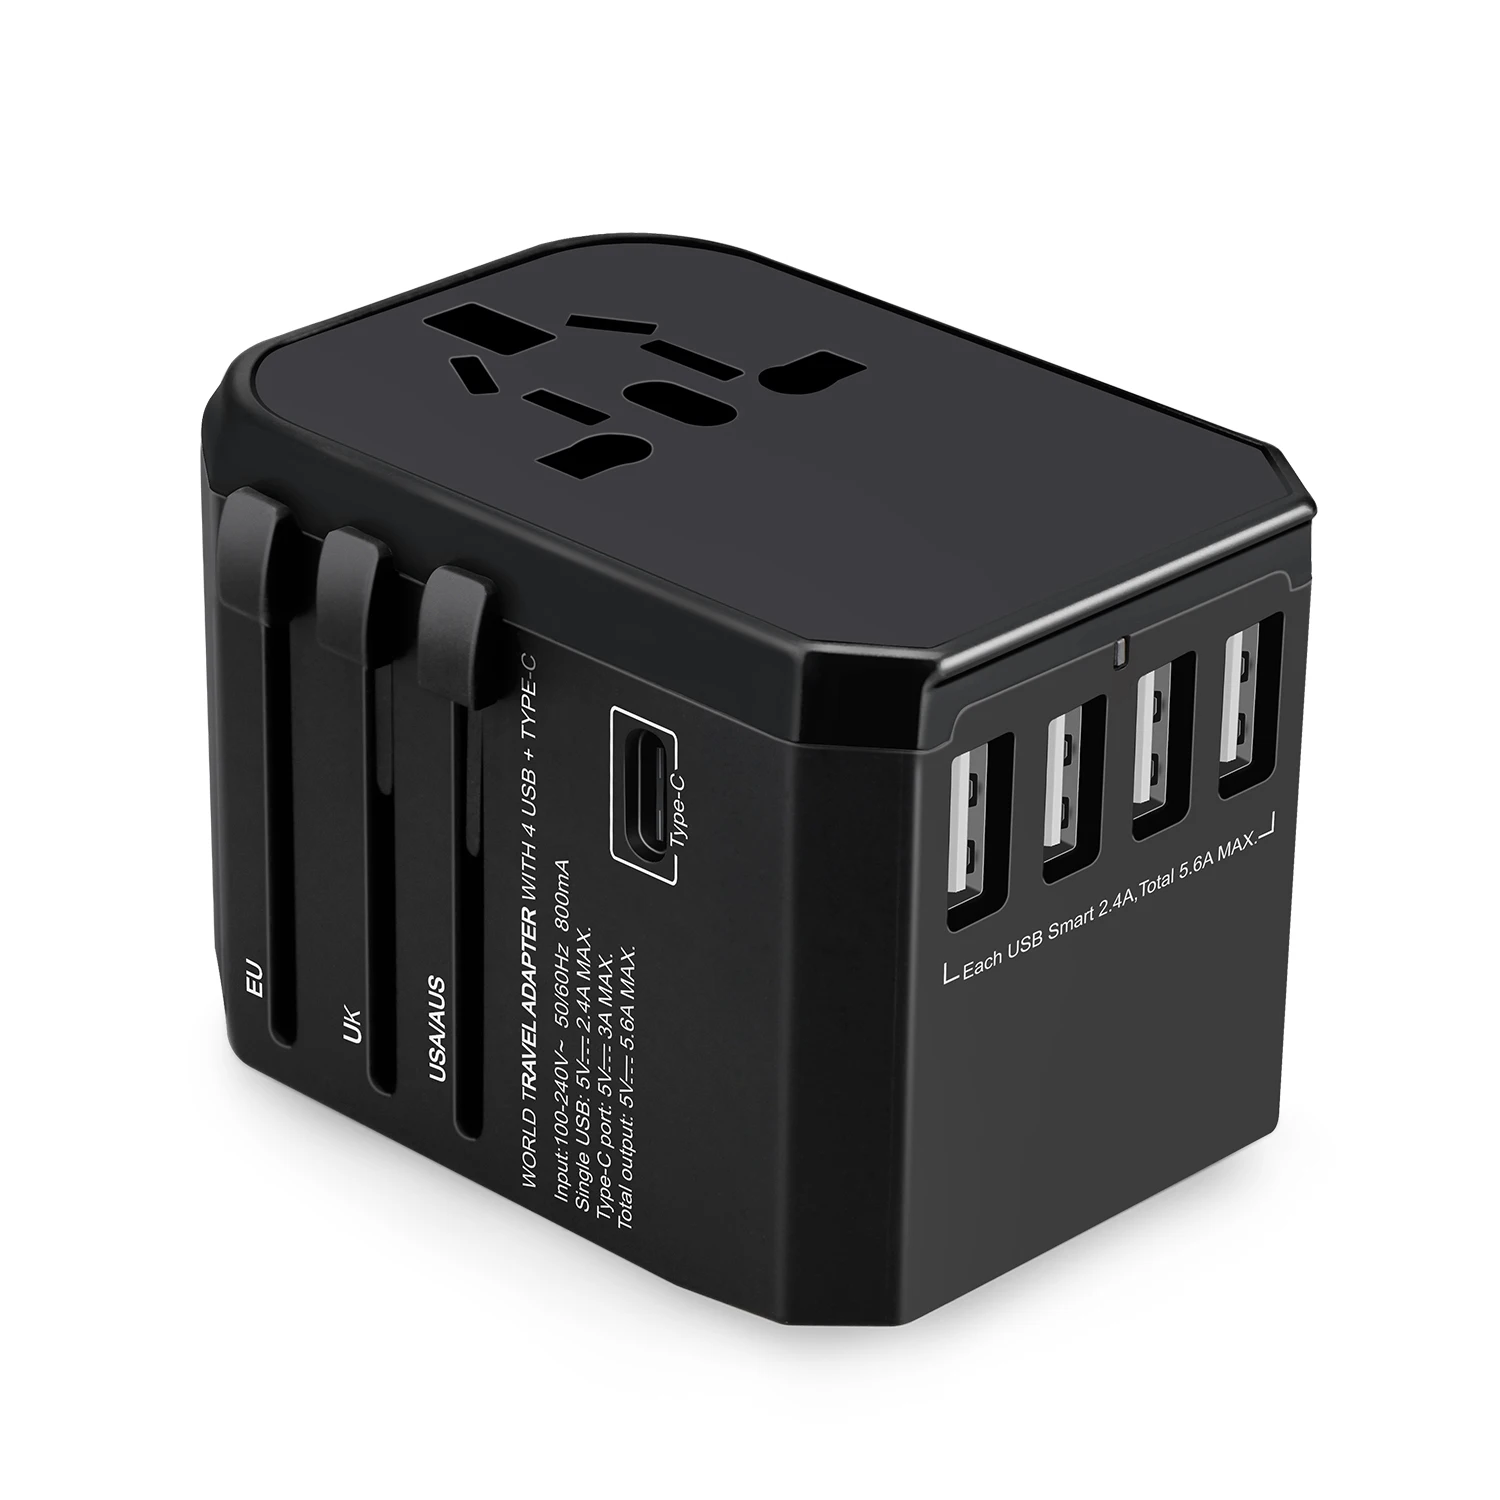 

Universal travel adaptor Type C charger UK AUS EU US plugs USB power adapter for promotion gifts, Black;white;pantone color